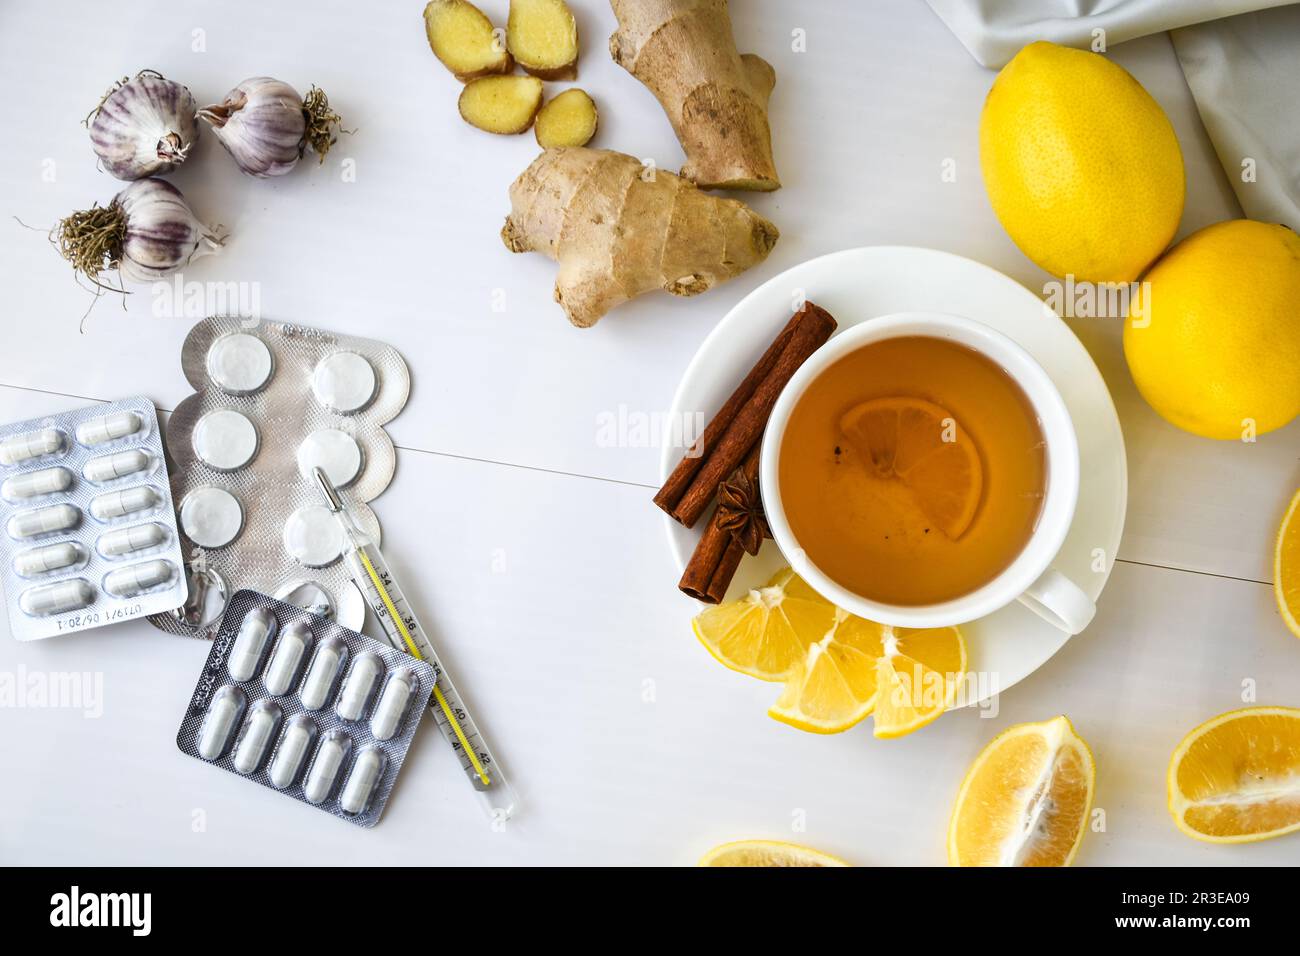 Products for the treatment of common cold - lemon, ginger, chamomile tea pills. Natural medicine vs conventional medicine Stock Photo